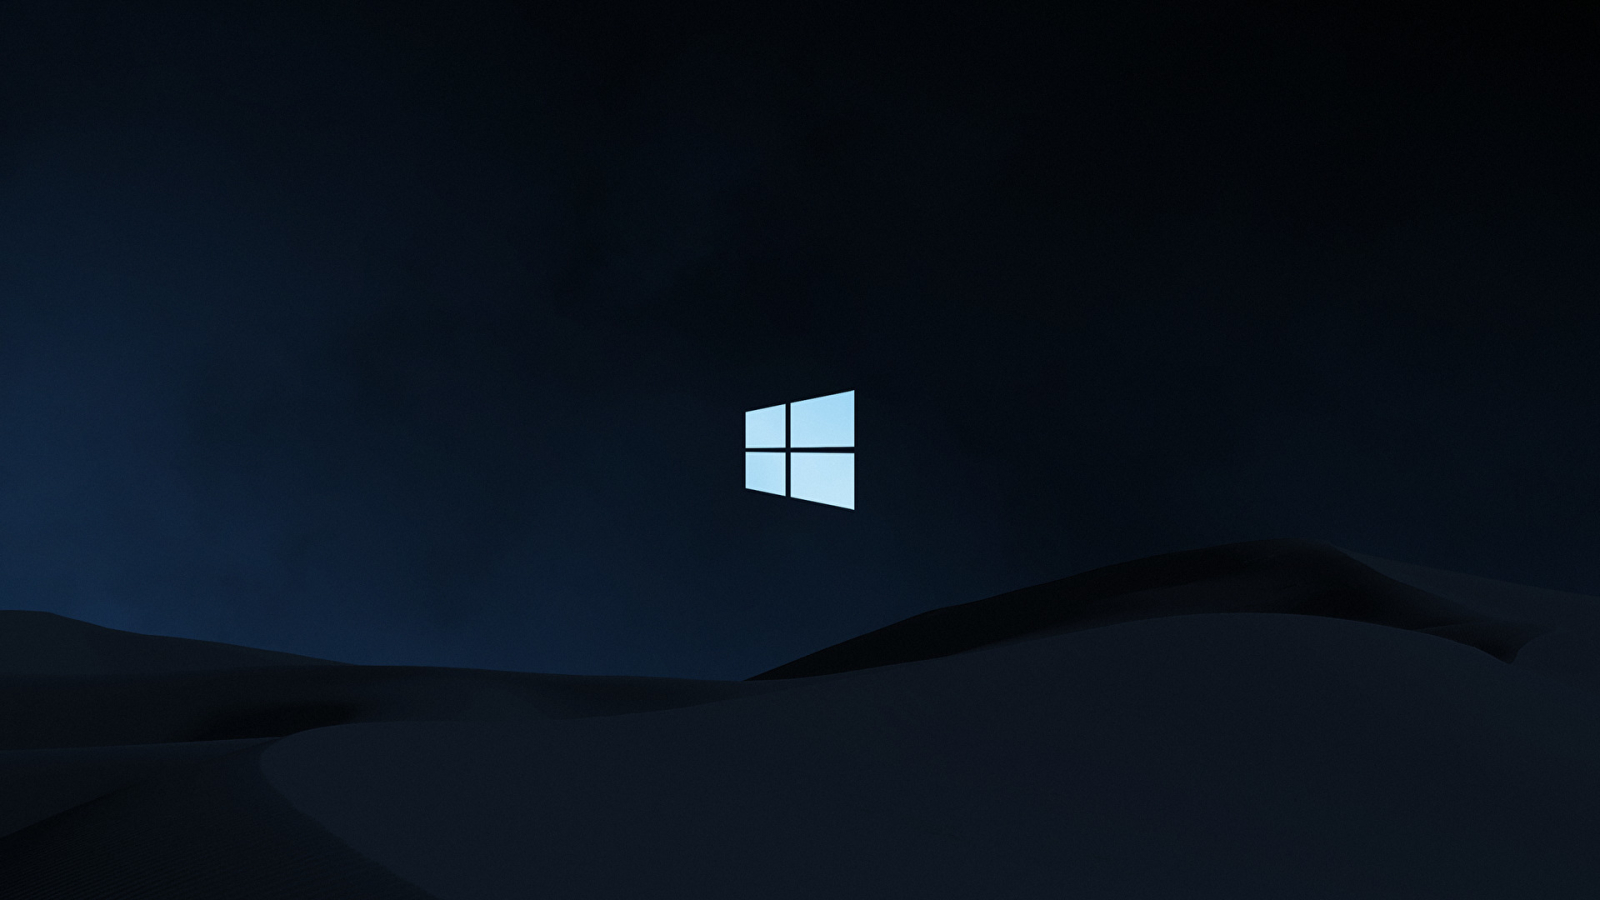 1600x900 Windows 10 Clean Dark 1600x900 Resolution Background Hd Brands 4k Wallpapers Images Photos And Background